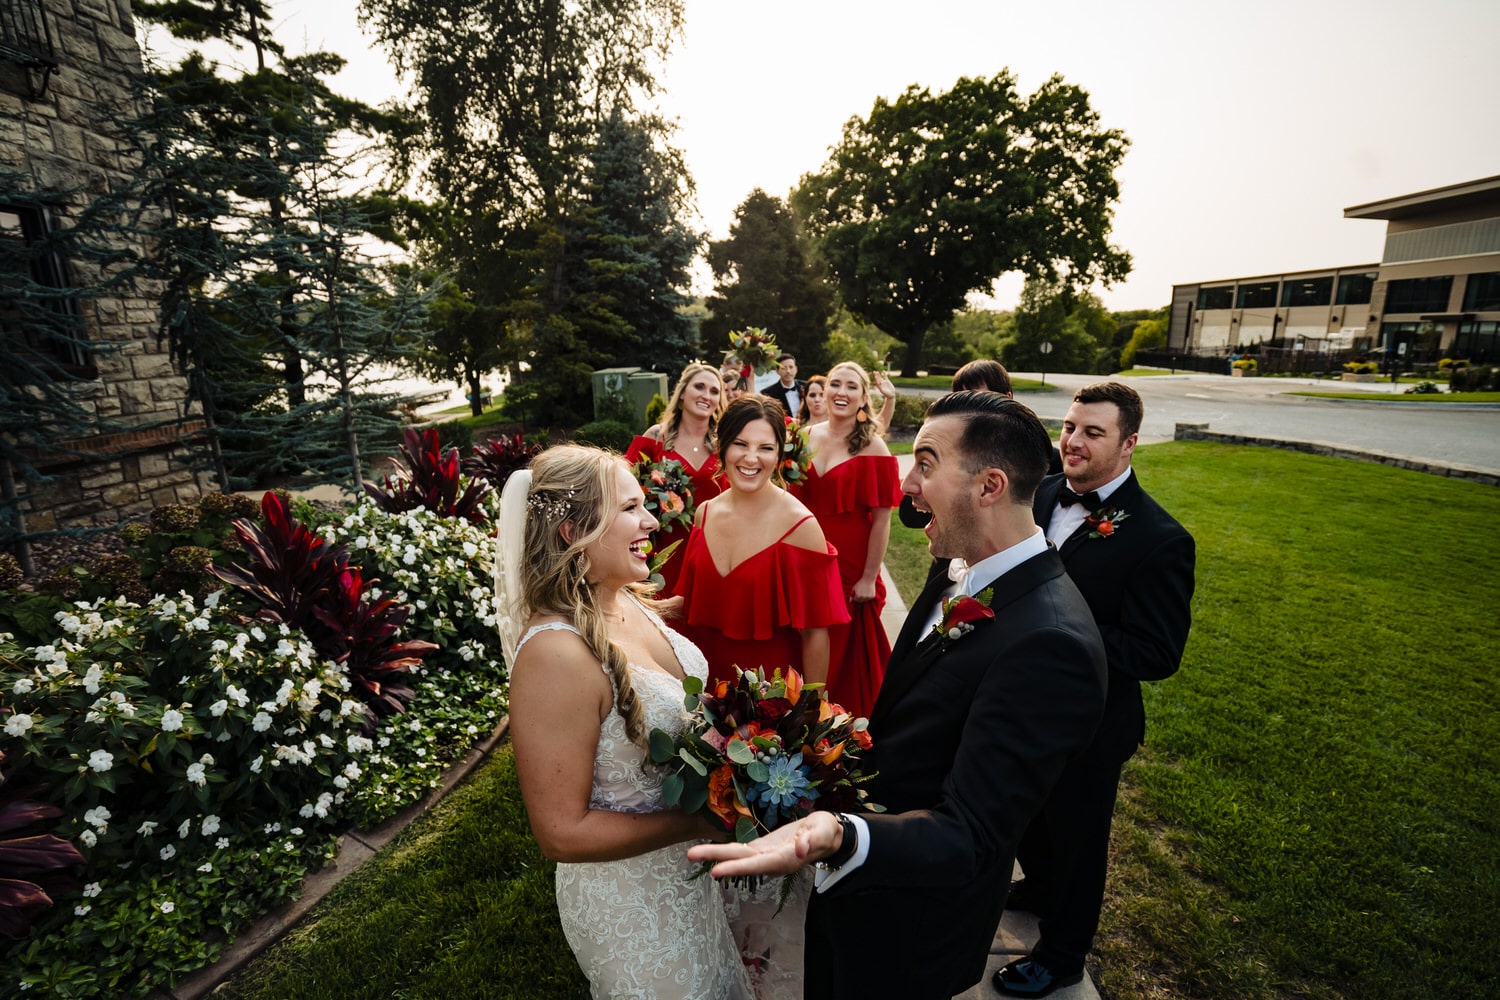 A candid, colorful picture of a bride and groom celebrating their marriage with their wedding party on a fall wedding day. 